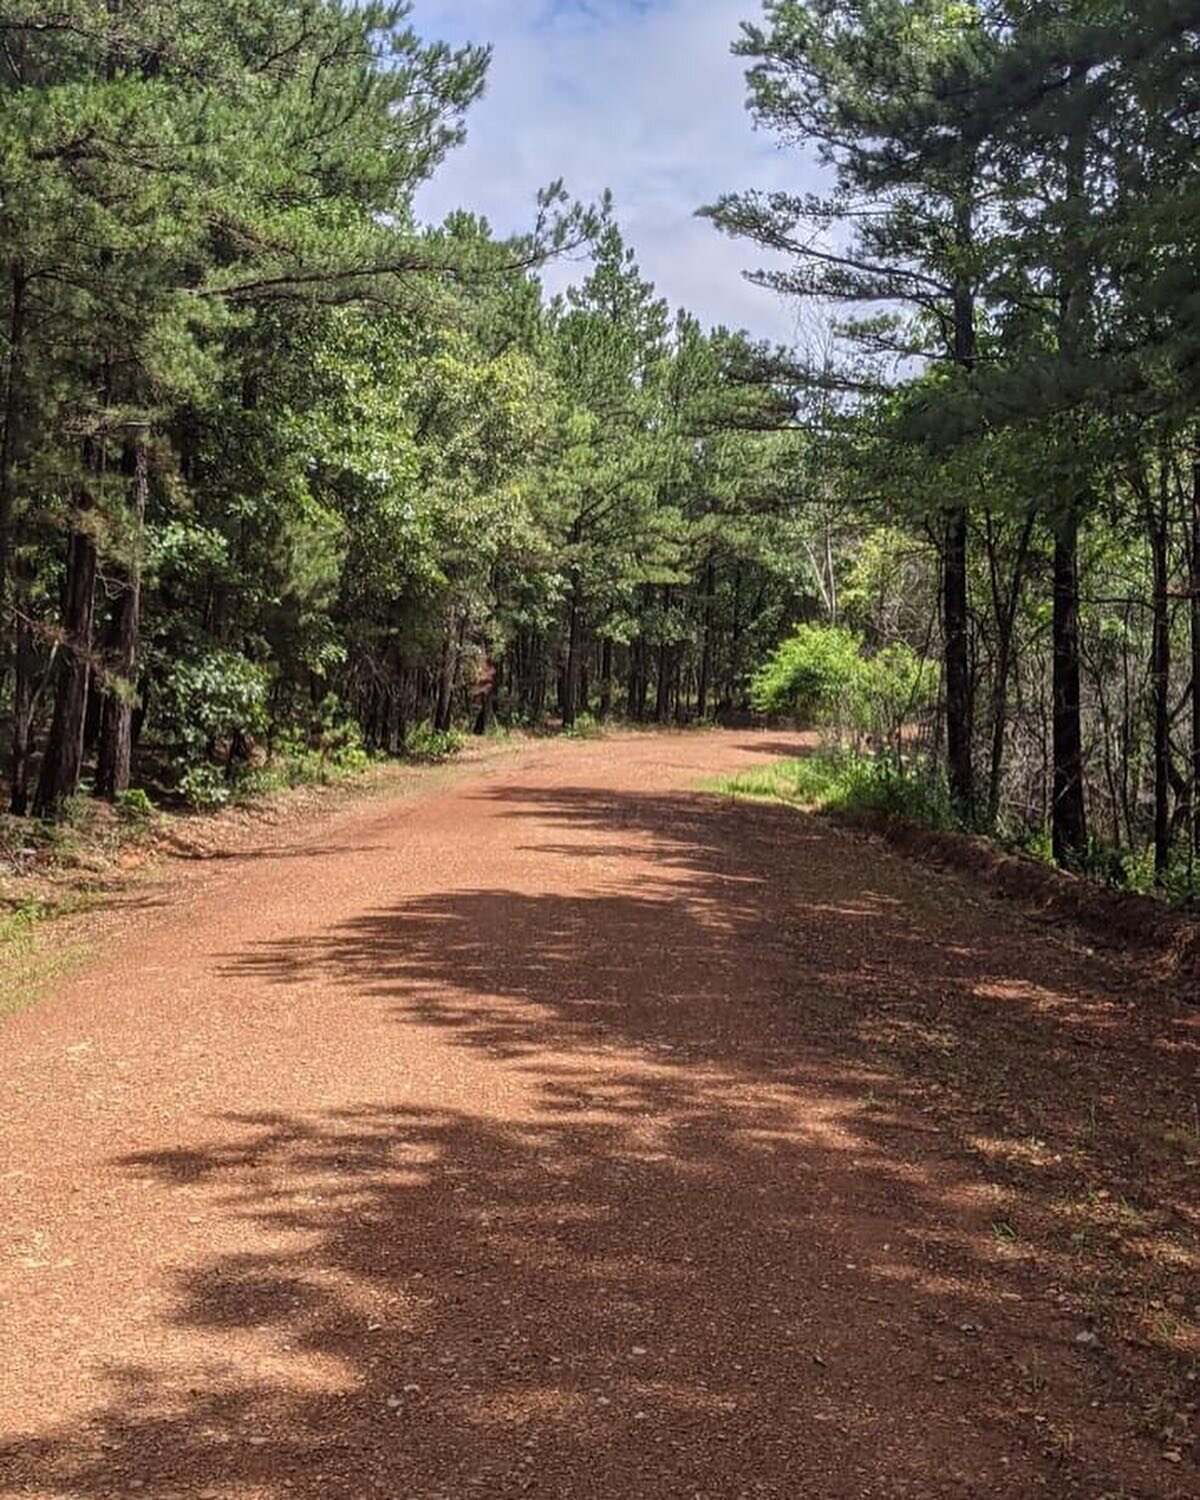 More great sections of the 50 mile (closer to 60 miles) course. 

If you are not riding and would like to volunteer, we have several opportunities. Send us a message.

August 7th, 2021 SiloamSprings GRINDURO Gravel ride! 

25 &amp; 50 mile option! 

